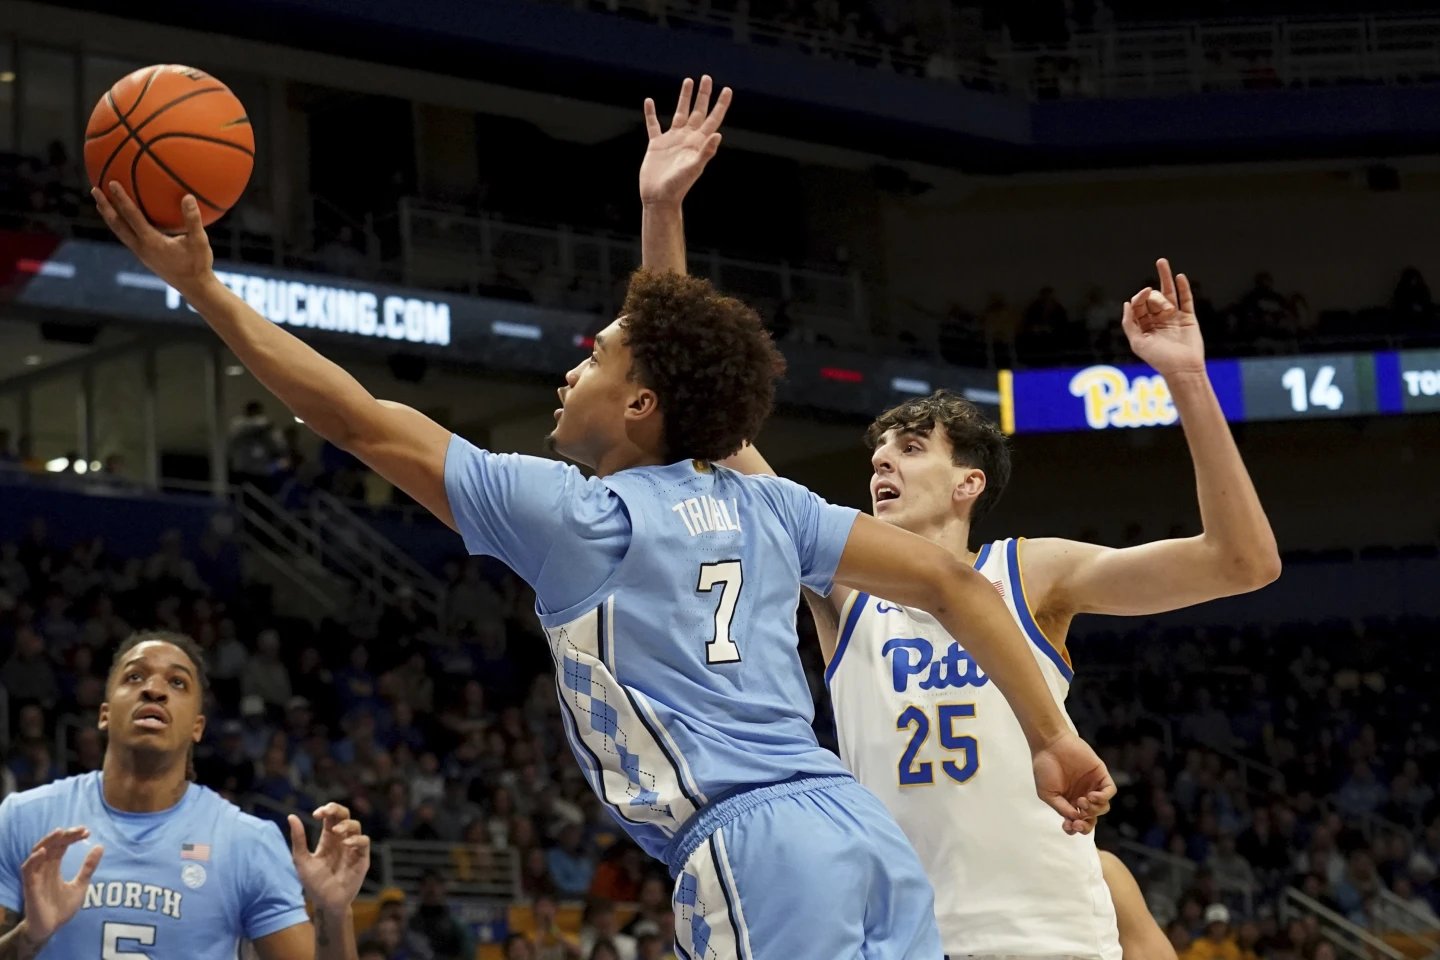 With Quad 1 victory at Pittsburgh, UNC Basketball jumps seven spots in